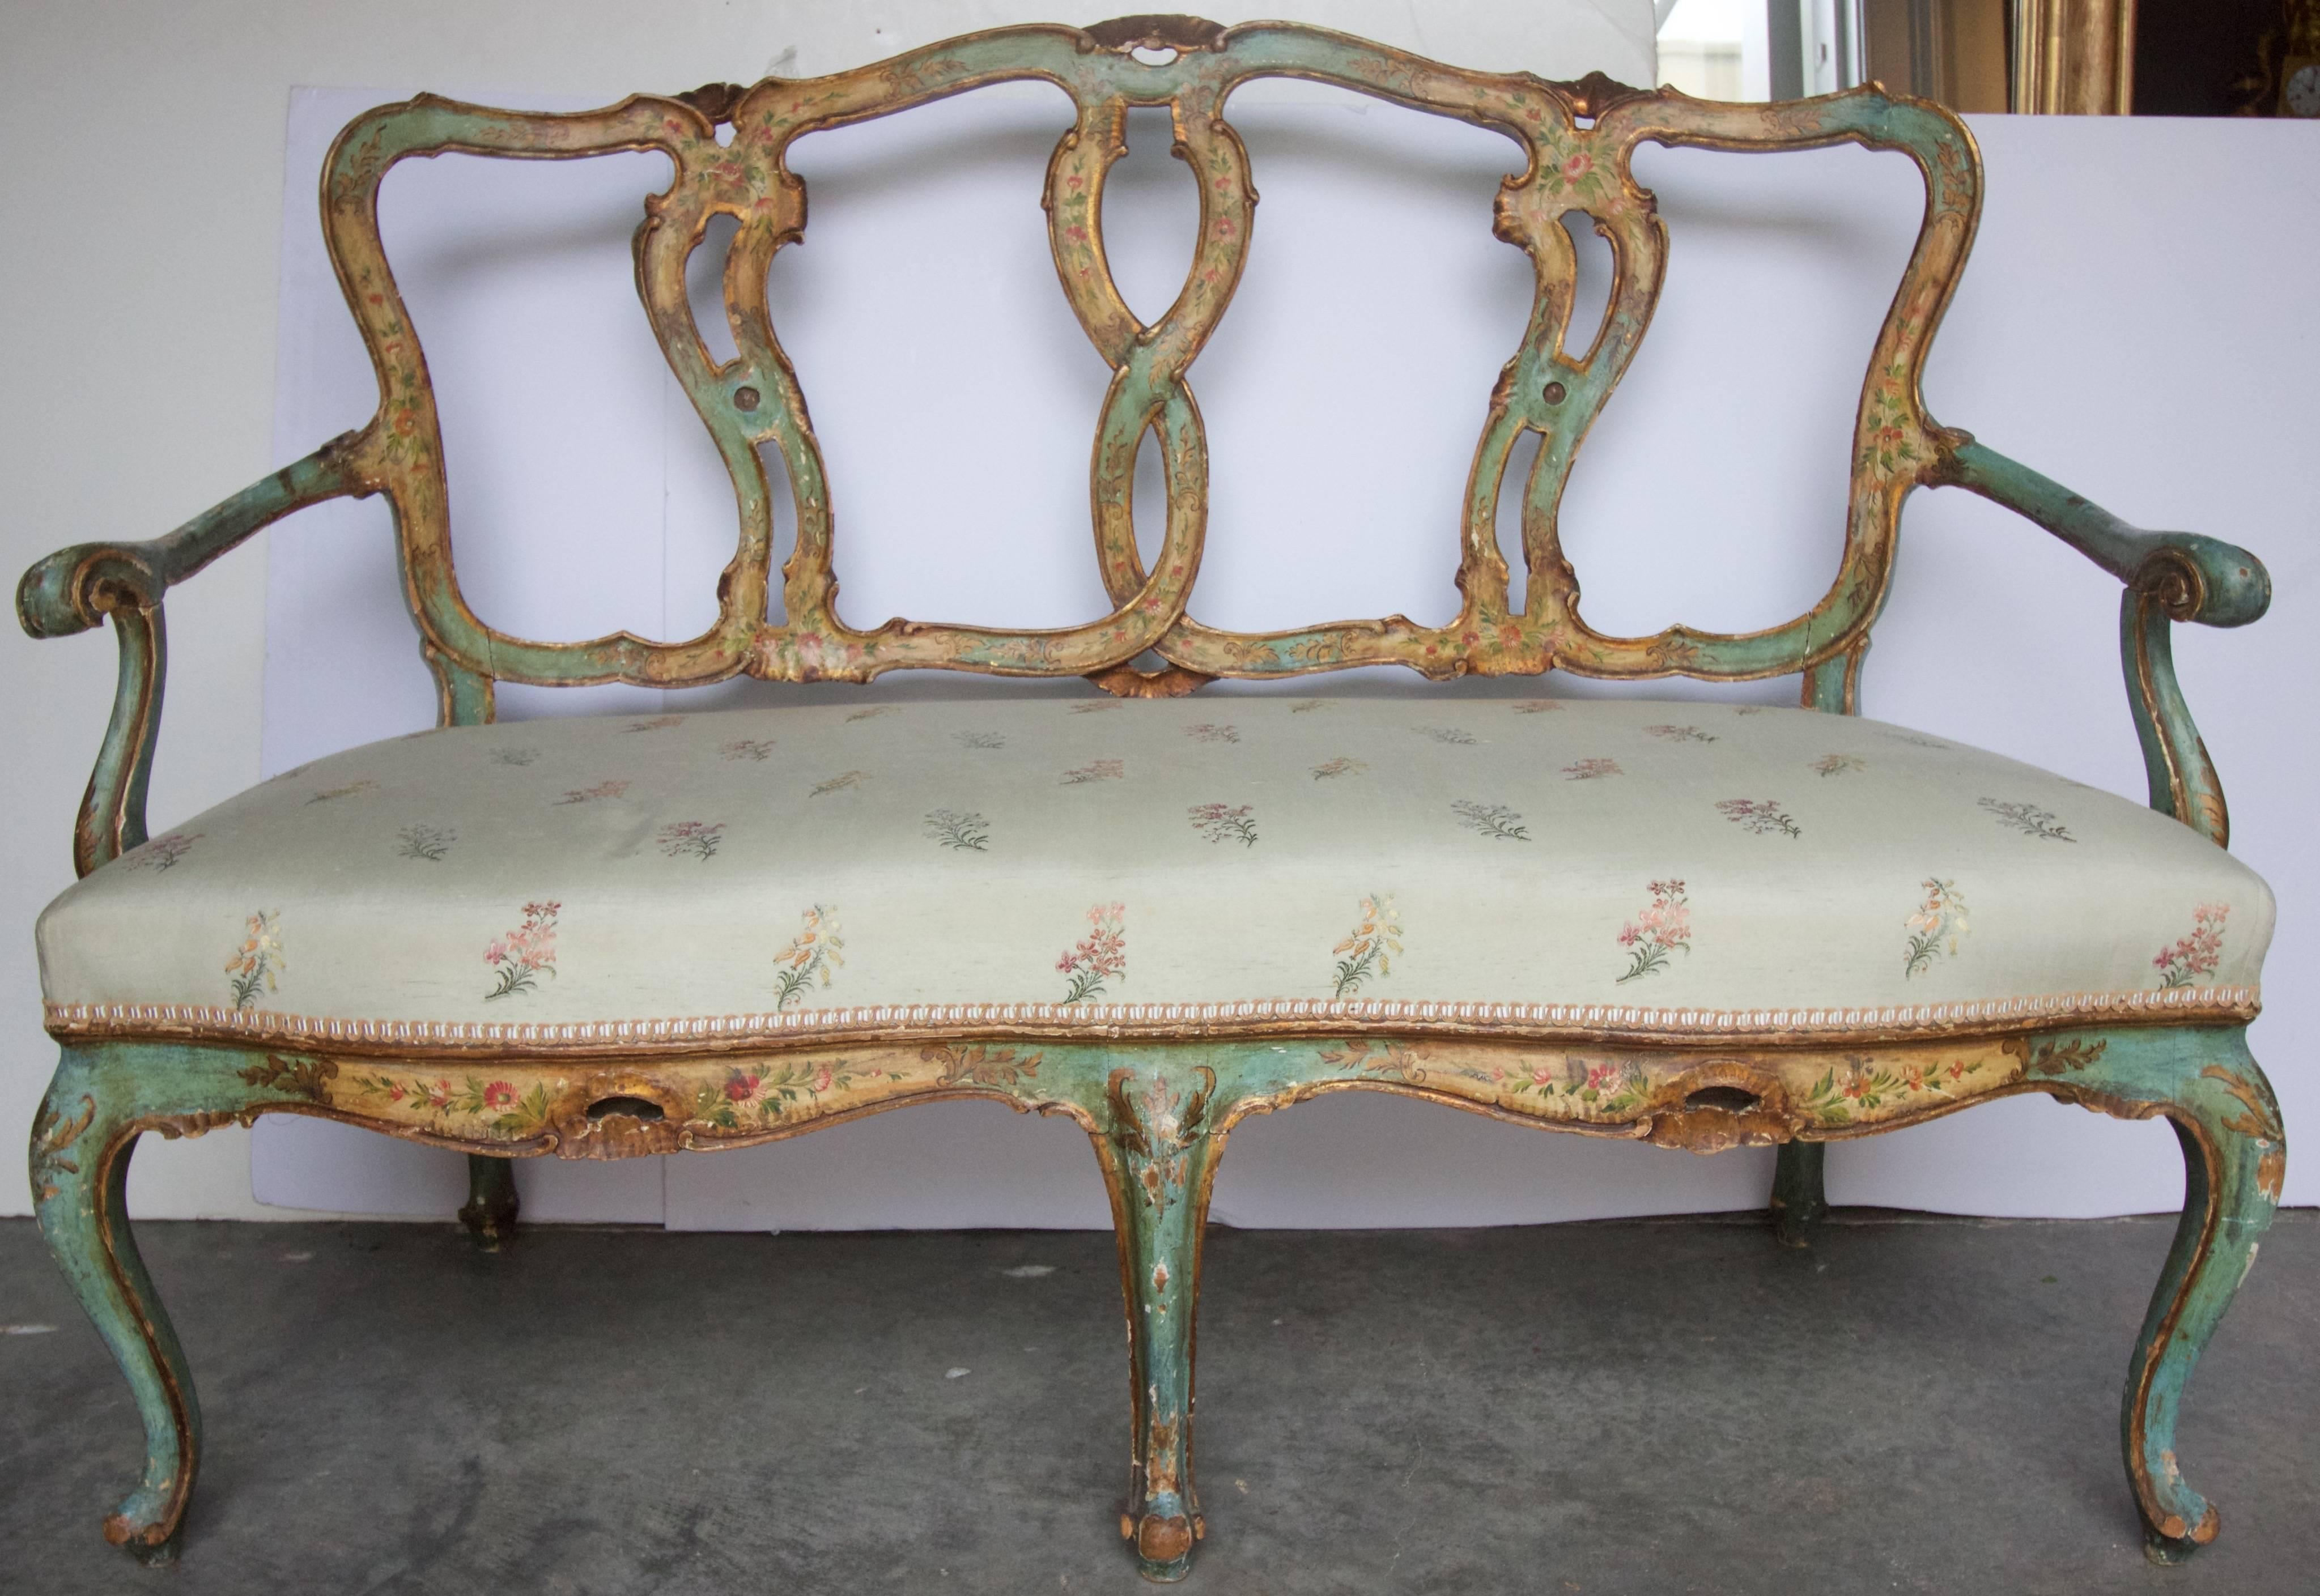 Hand-painted and carved Venetian Canape'. Exquisite in design and execution in a deep robin’s egg blue with cream and gold and hand-painted flowers and details. Nice Patina. Cabriole Legs, Serpentine seat rail.
Light and elegant in nature.